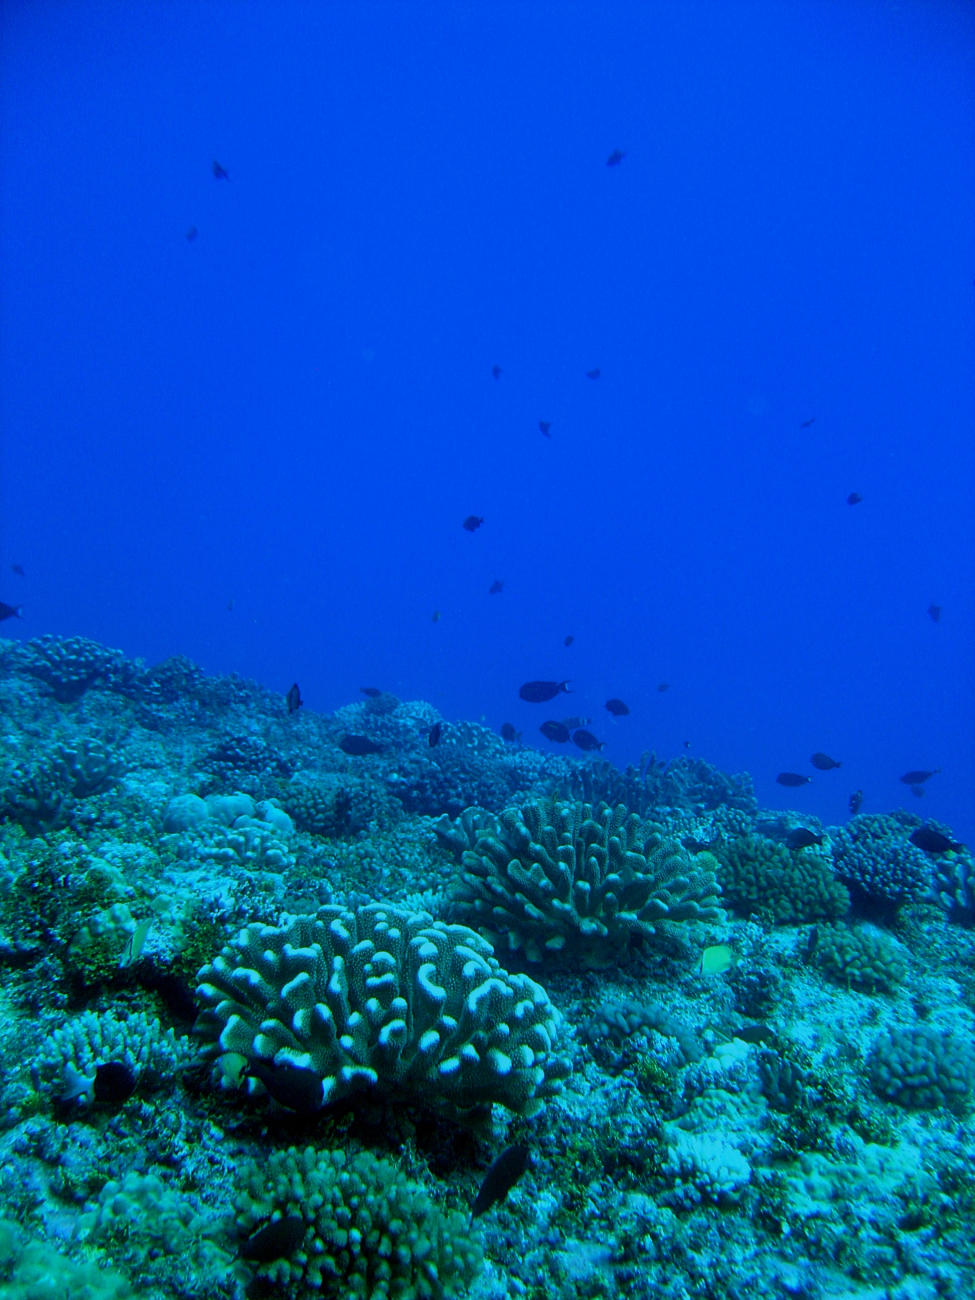 Reef scene with reef fish